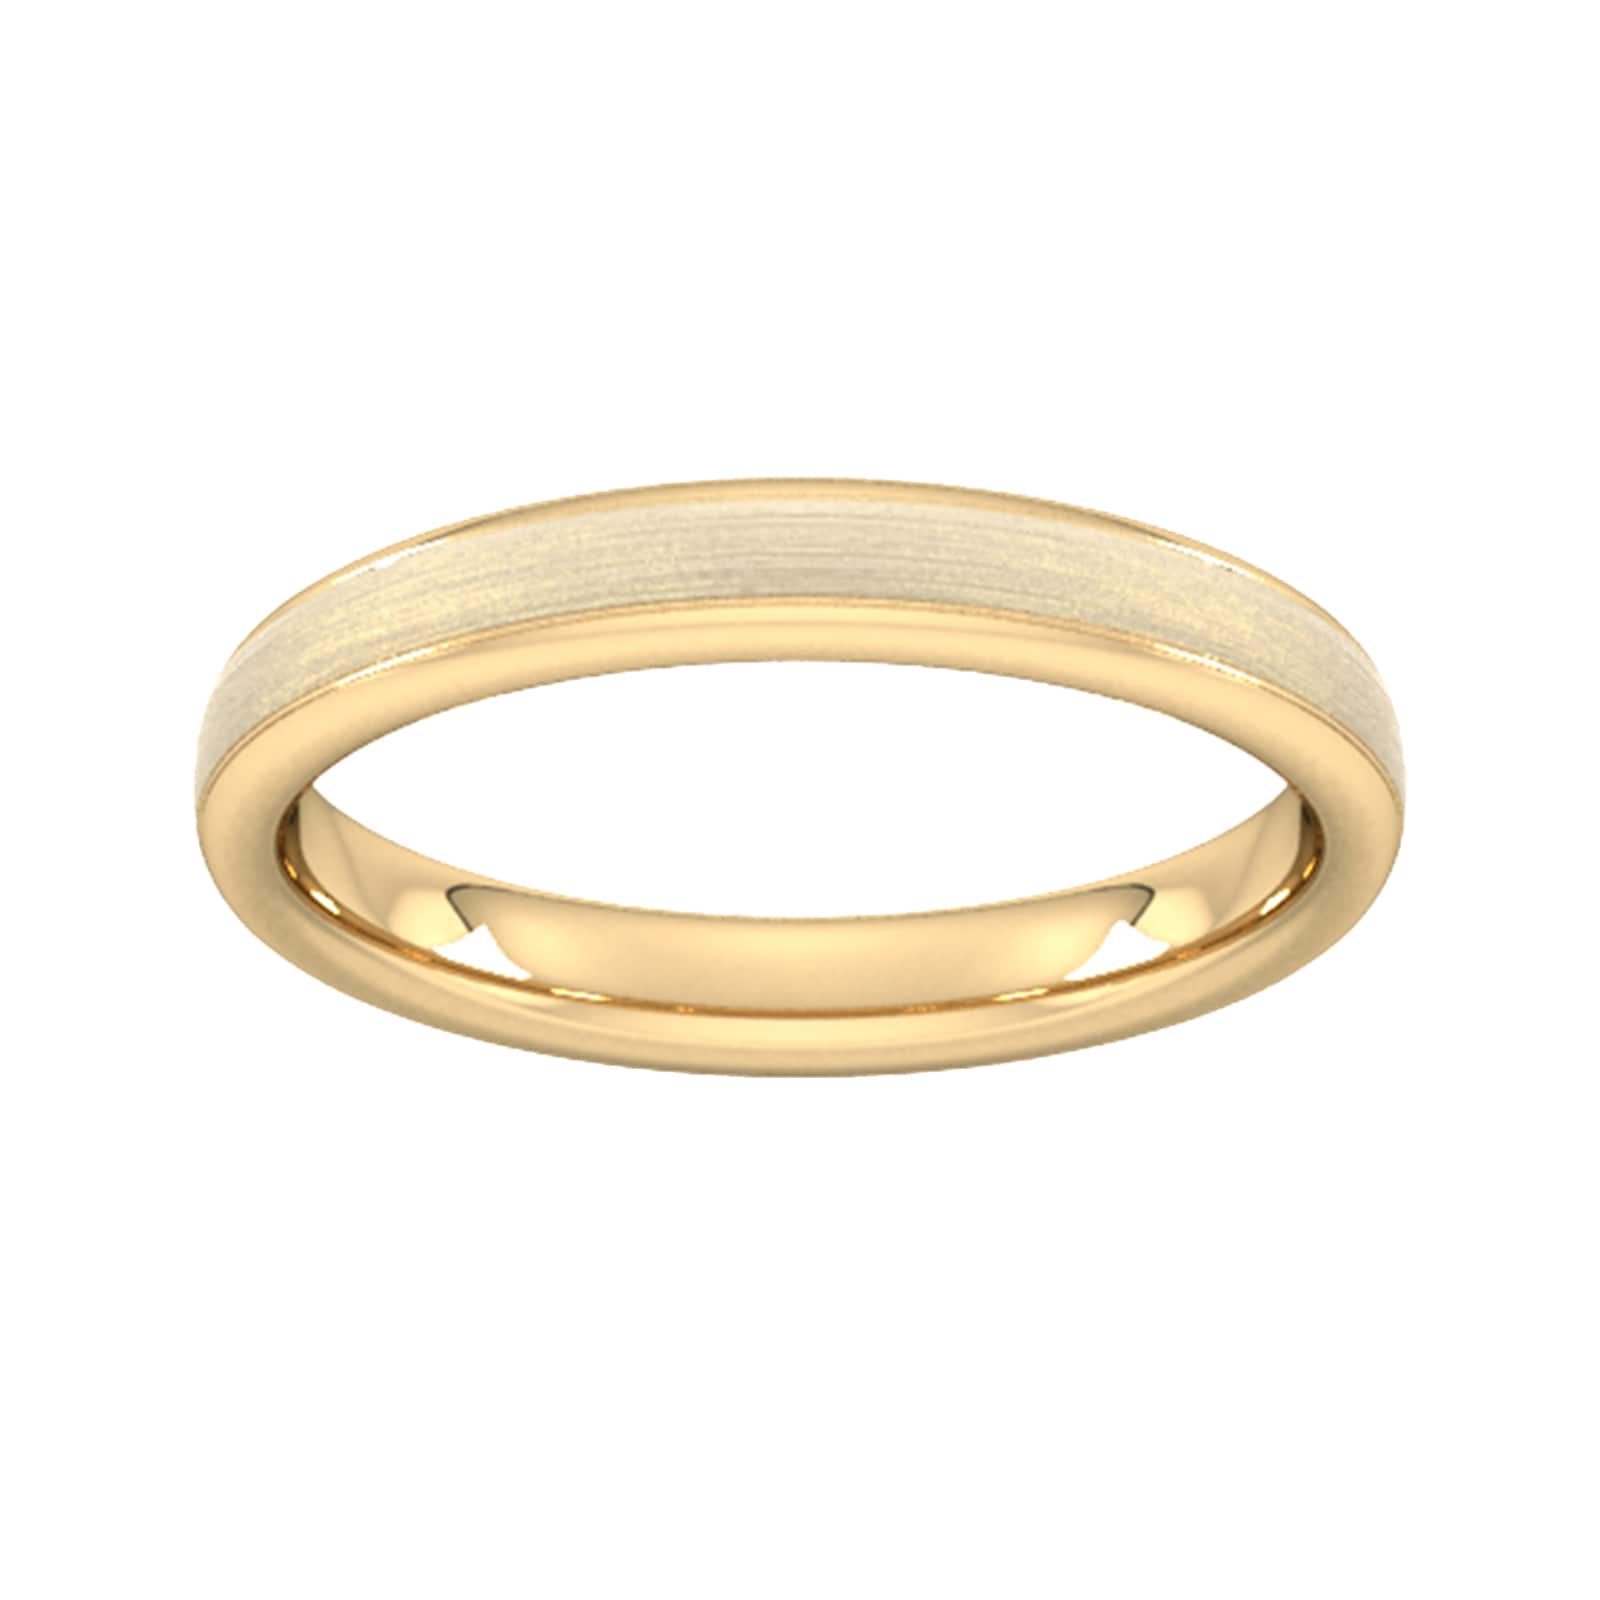 3mm Flat Court Heavy Matt Centre With Grooves Wedding Ring In 18 Carat Yellow Gold - Ring Size M